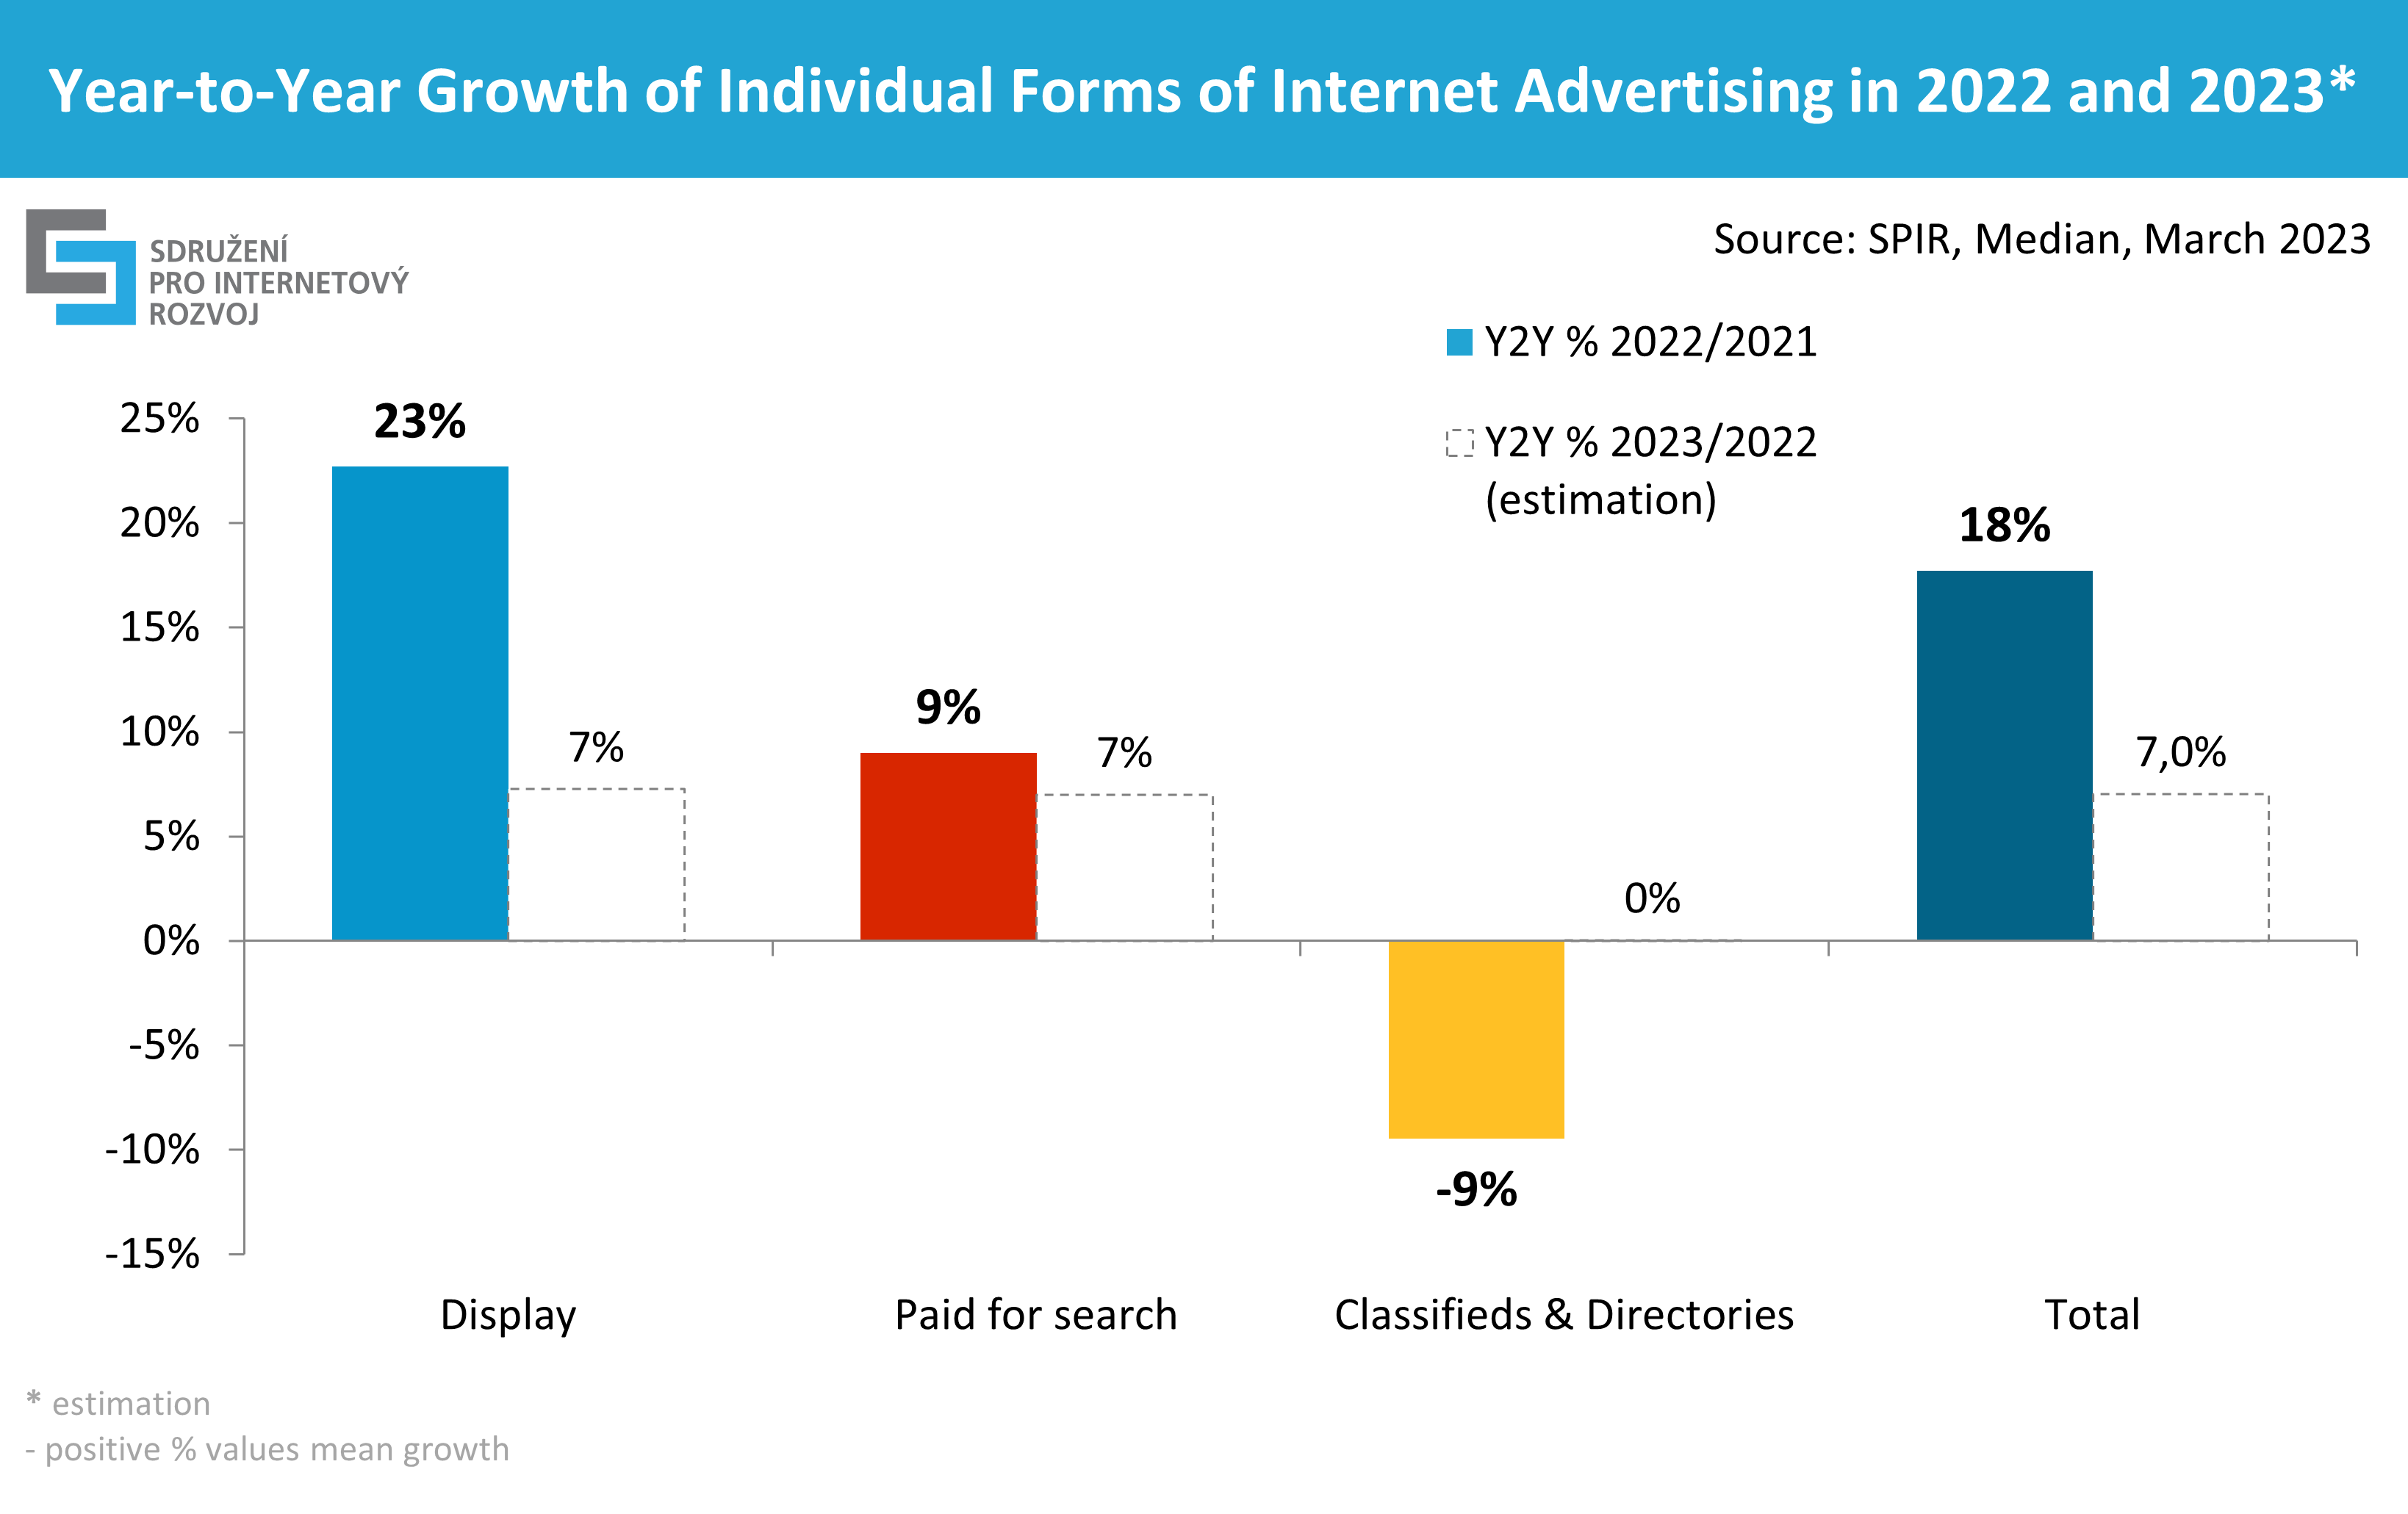 Year-on-year changes in individual forms of Internet advertising in 2022 and an estimate for 2023